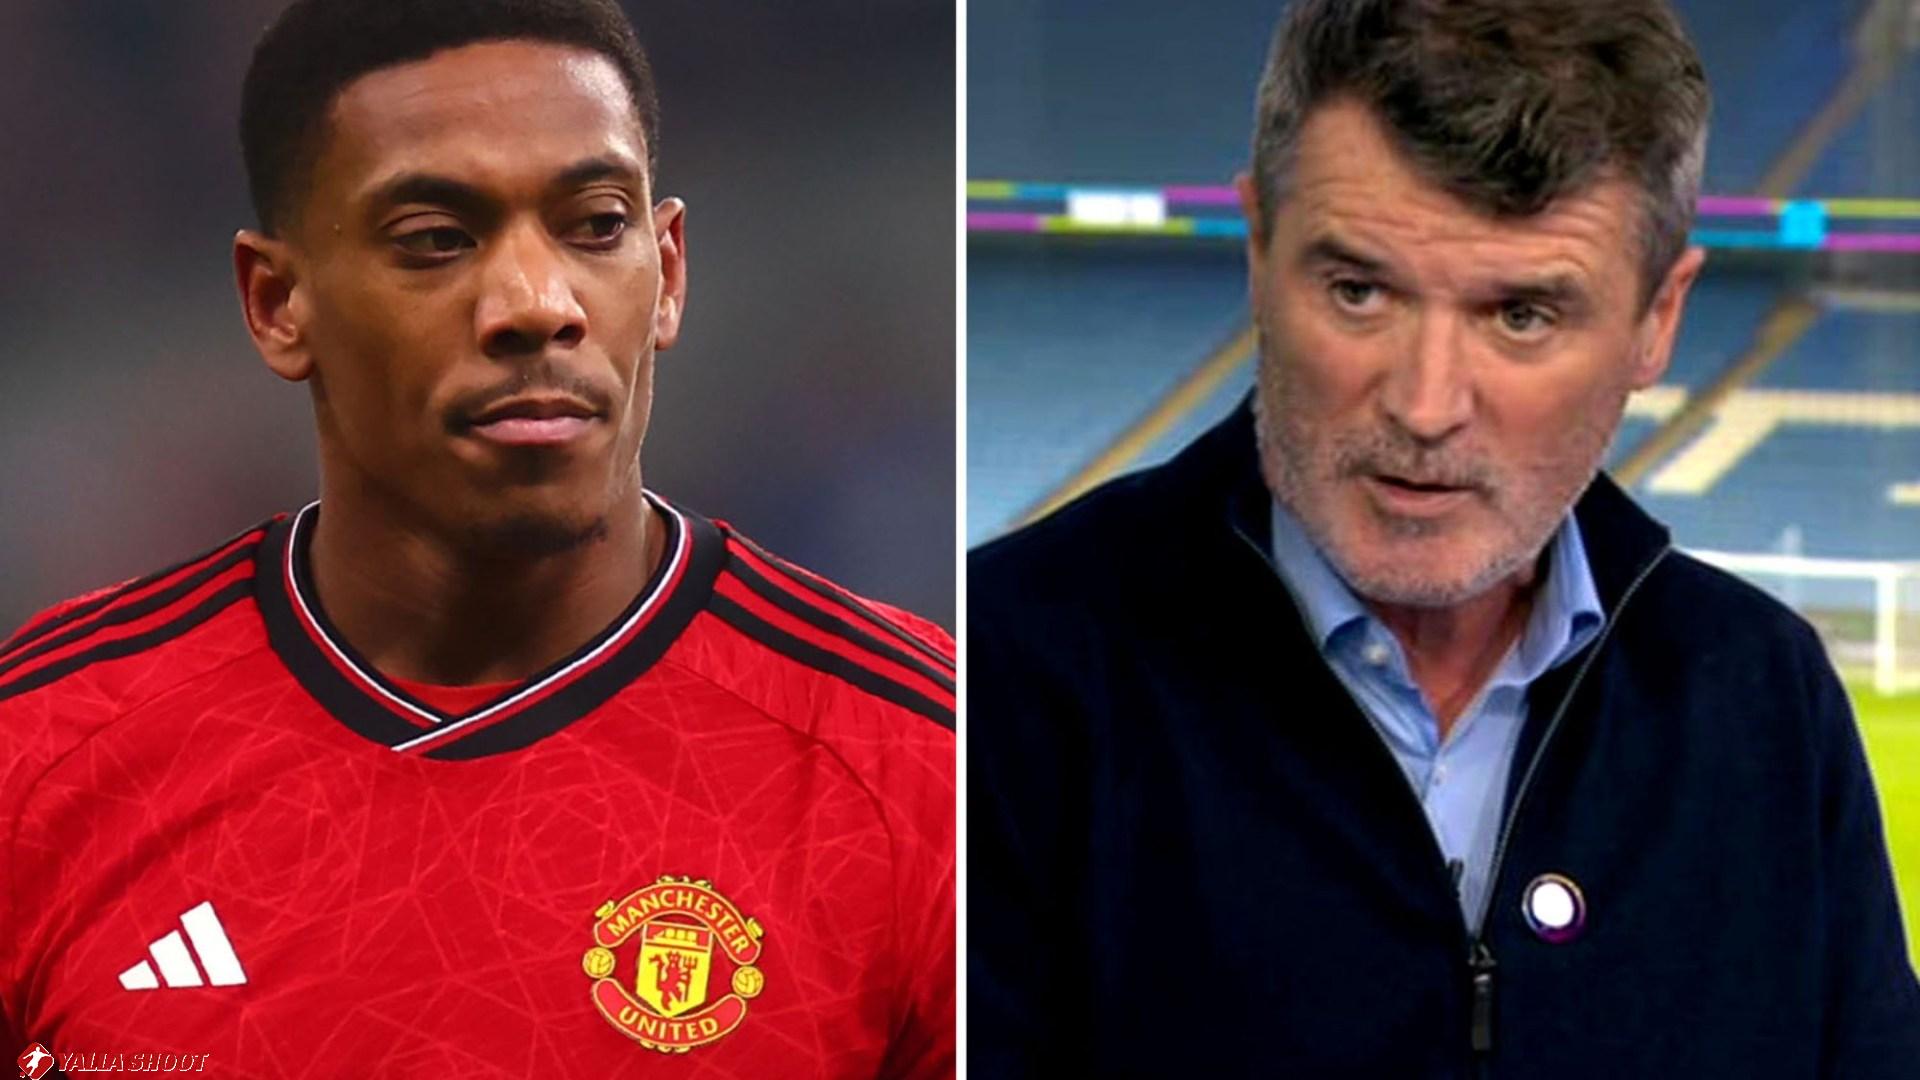 Roy Keane launches scathing attack on Man Utd star as legend tells flop to ‘drop down a few leagues’